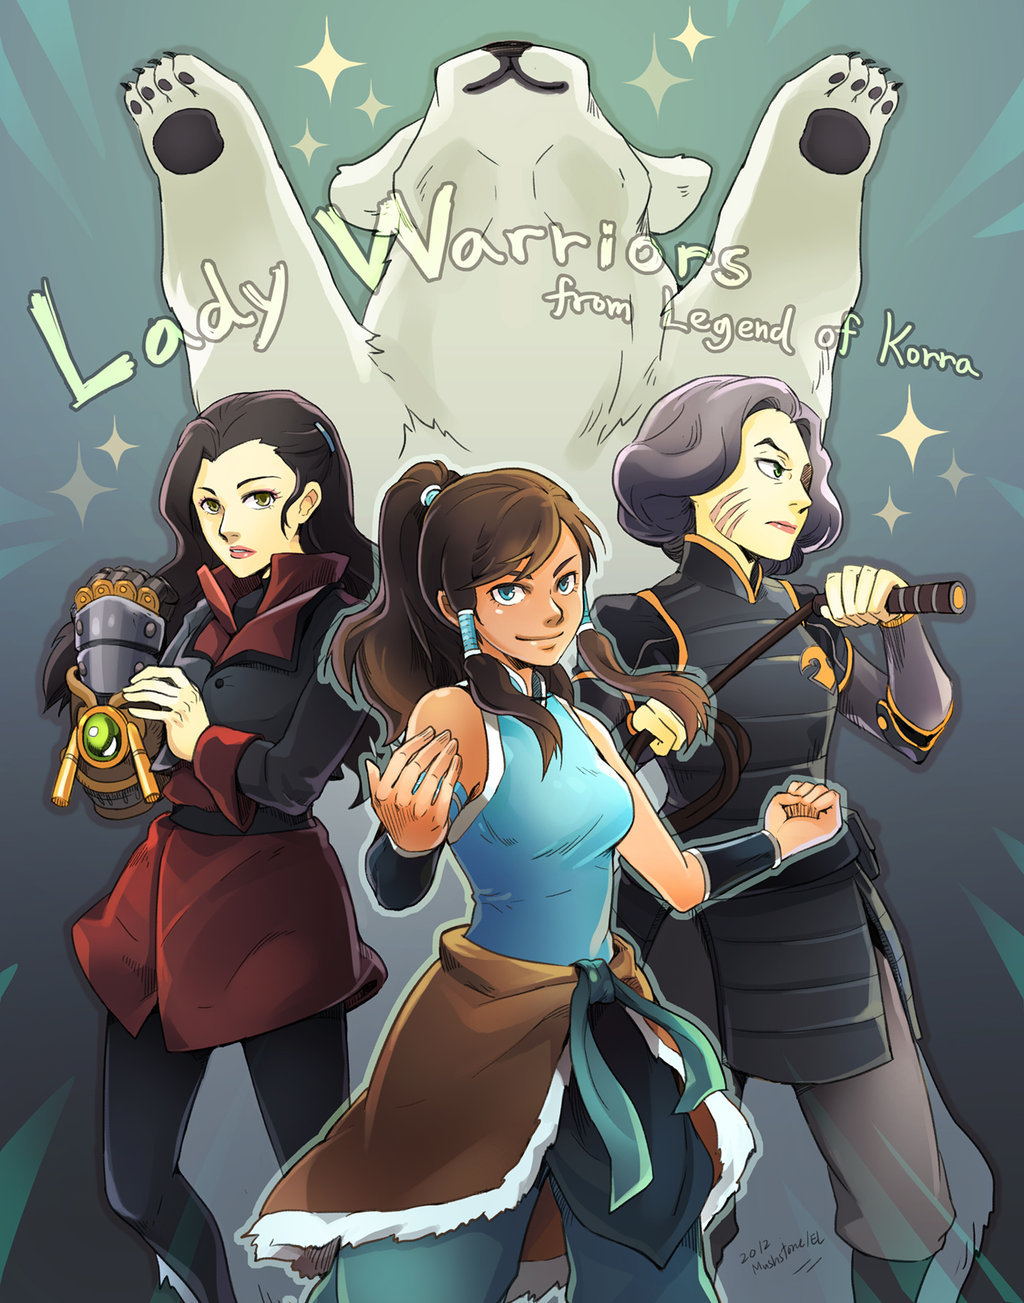 art-of-the-avatar:  Lady warriors from Legend of Korra by ~Mushstone  such fine ladies~